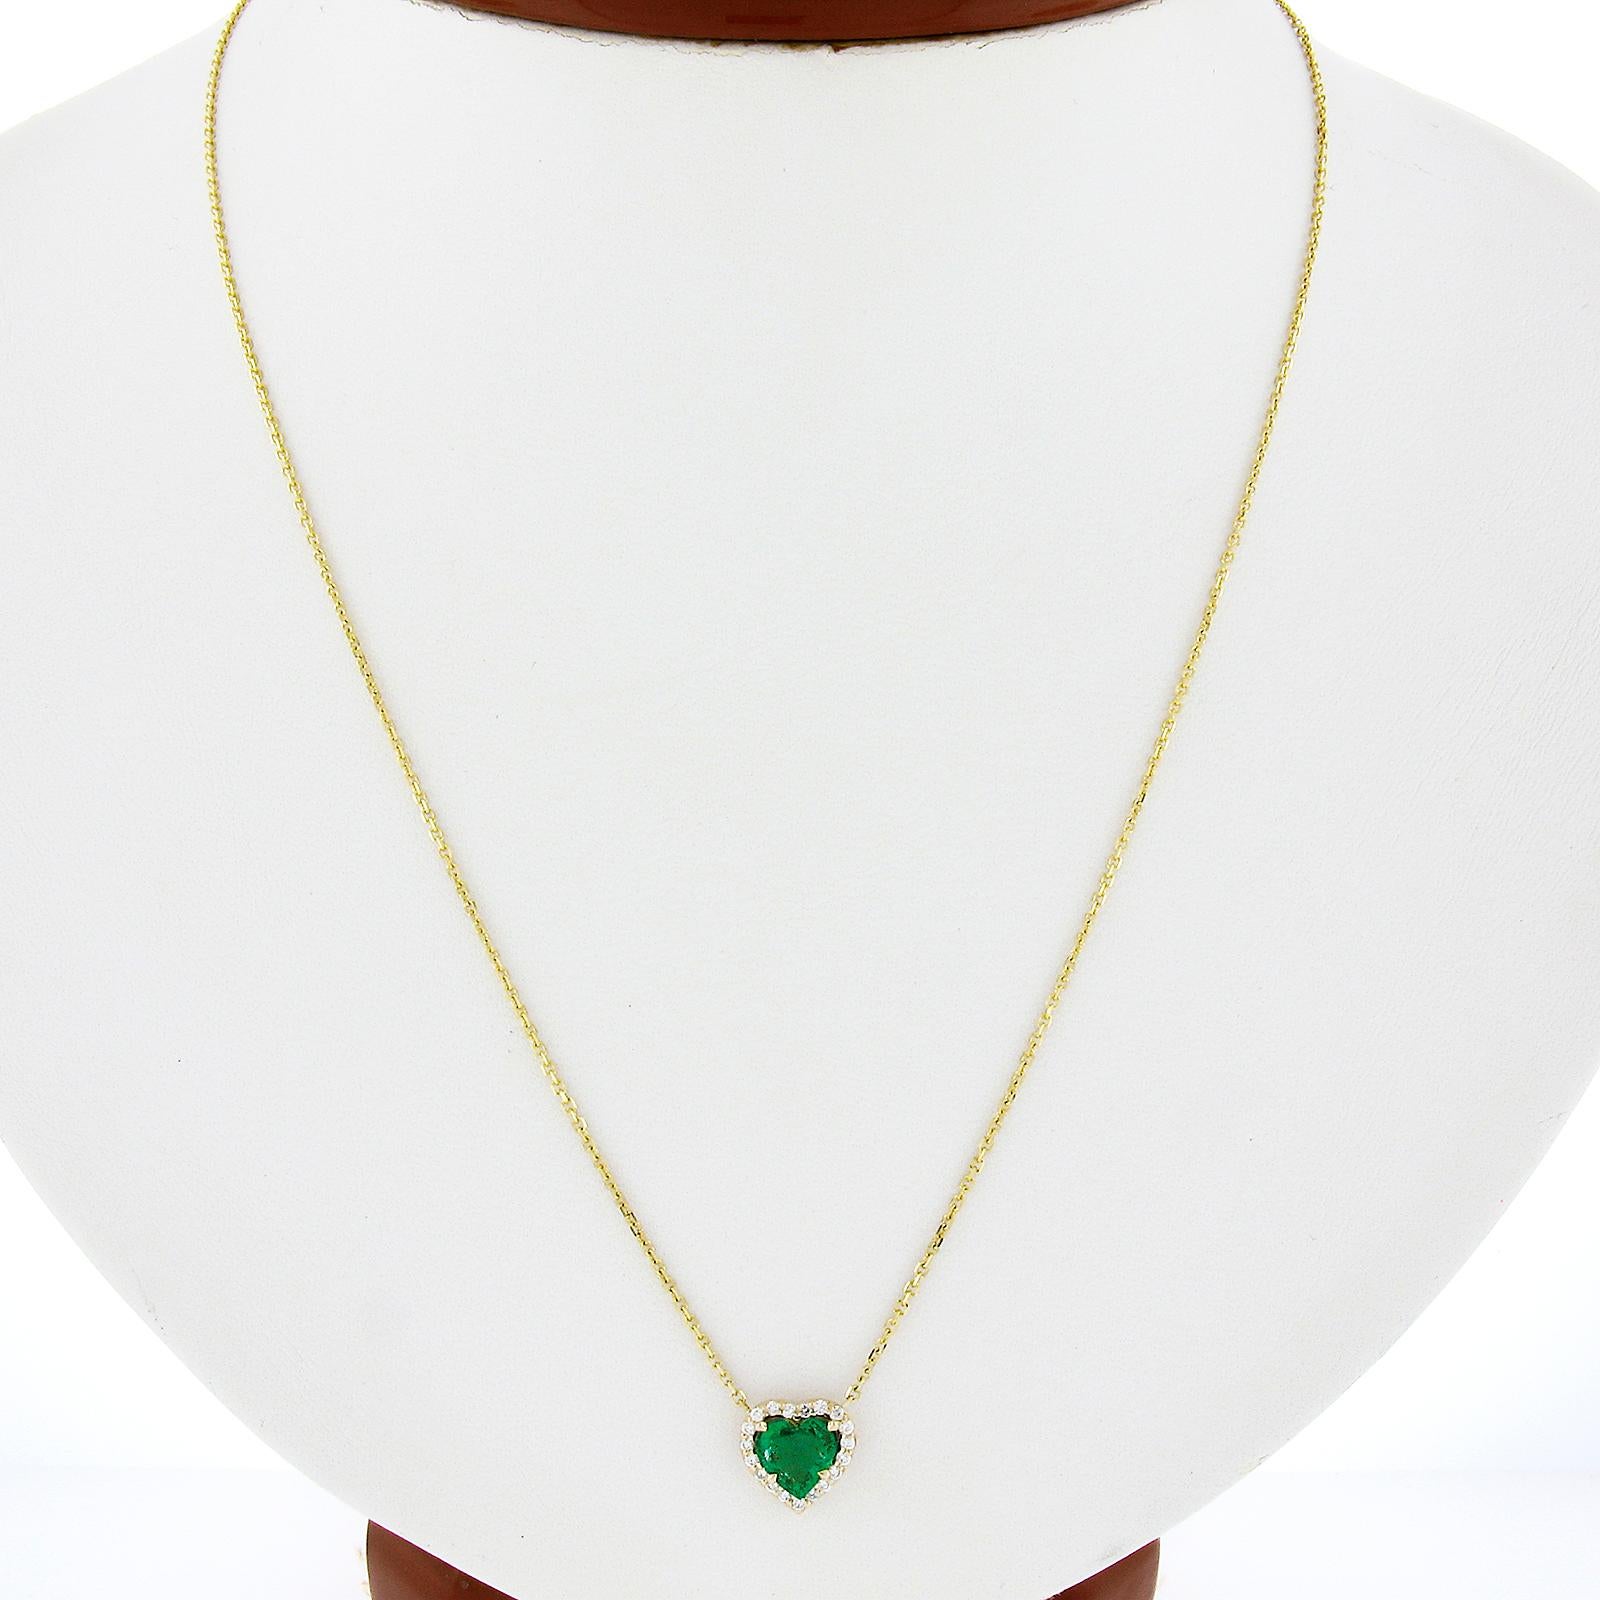 This brand new pendant necklace is crafted in solid 14k yellow gold and features an outstanding emerald gemstone that sits at the center of a brilliant diamond halo. This gorgeous emerald has an exceptional heart brilliant cut with a super